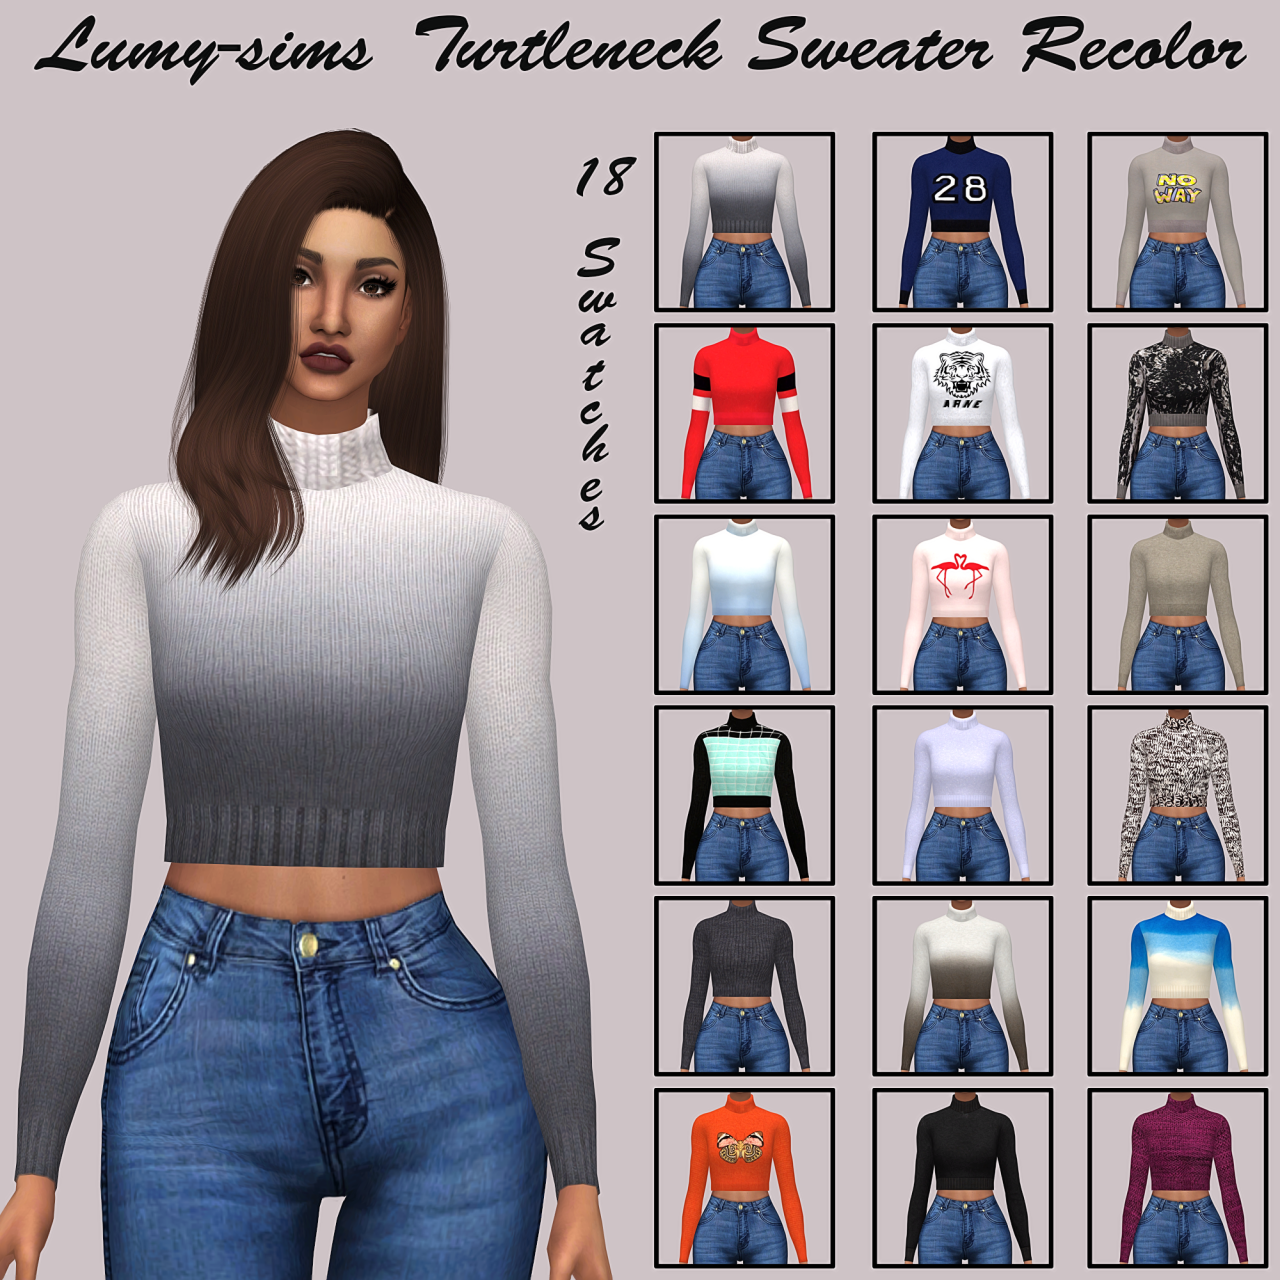 • Puresims turtleneck sweater recolor• 18 Swatches• Custom catalog thumbnail• You need the MESH from @puresims for it to show up• Credits: to @puresims for letting recoloring their meshes :)• DOWNLOADOrigina size X